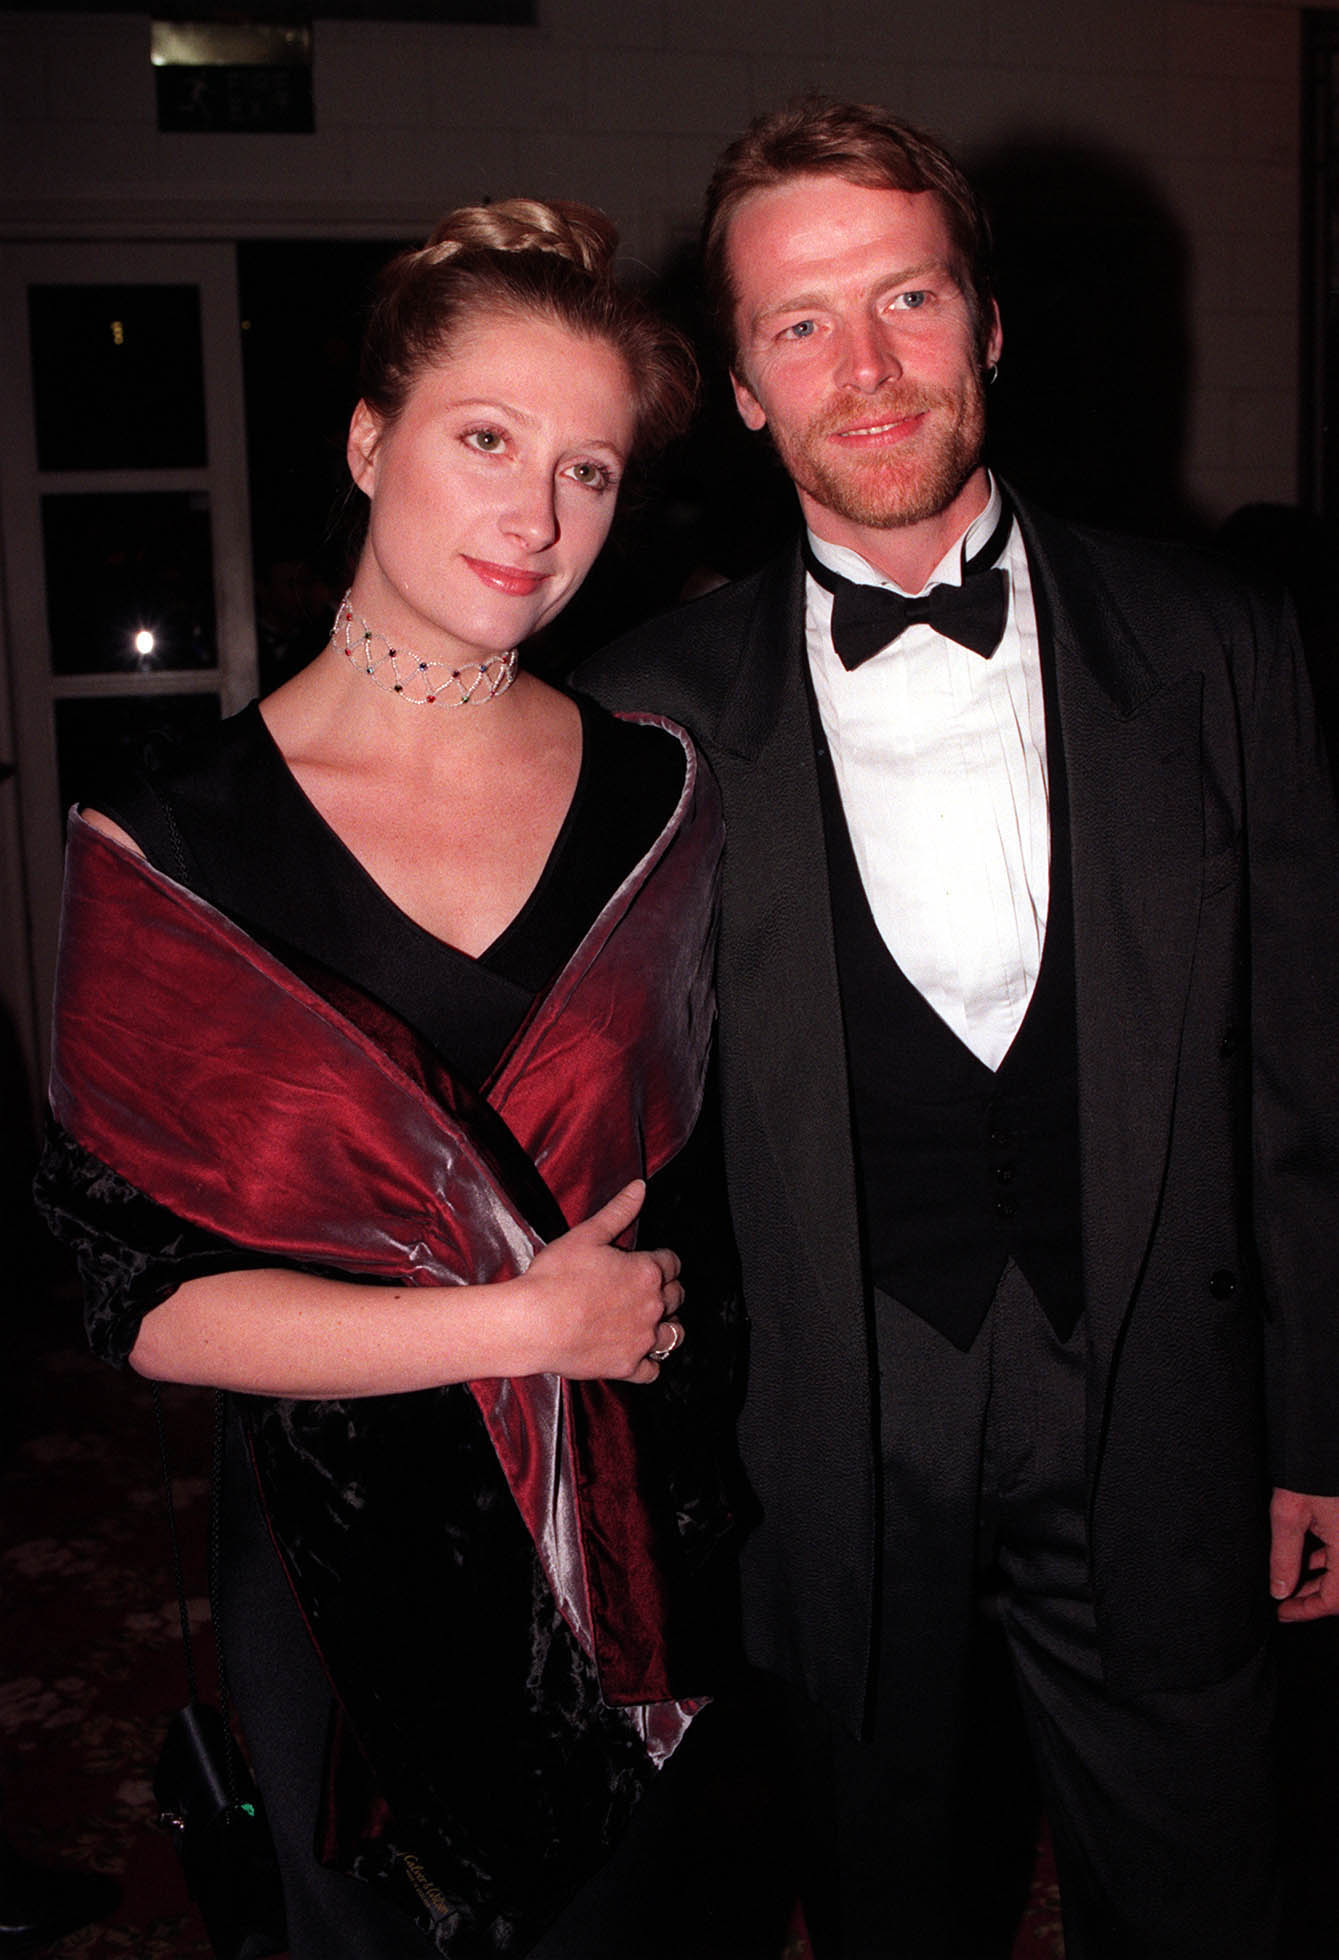 Iain Glenn and Susannah Harker at the 1997 Laurence Olivier Awards. | Source: Getty Images